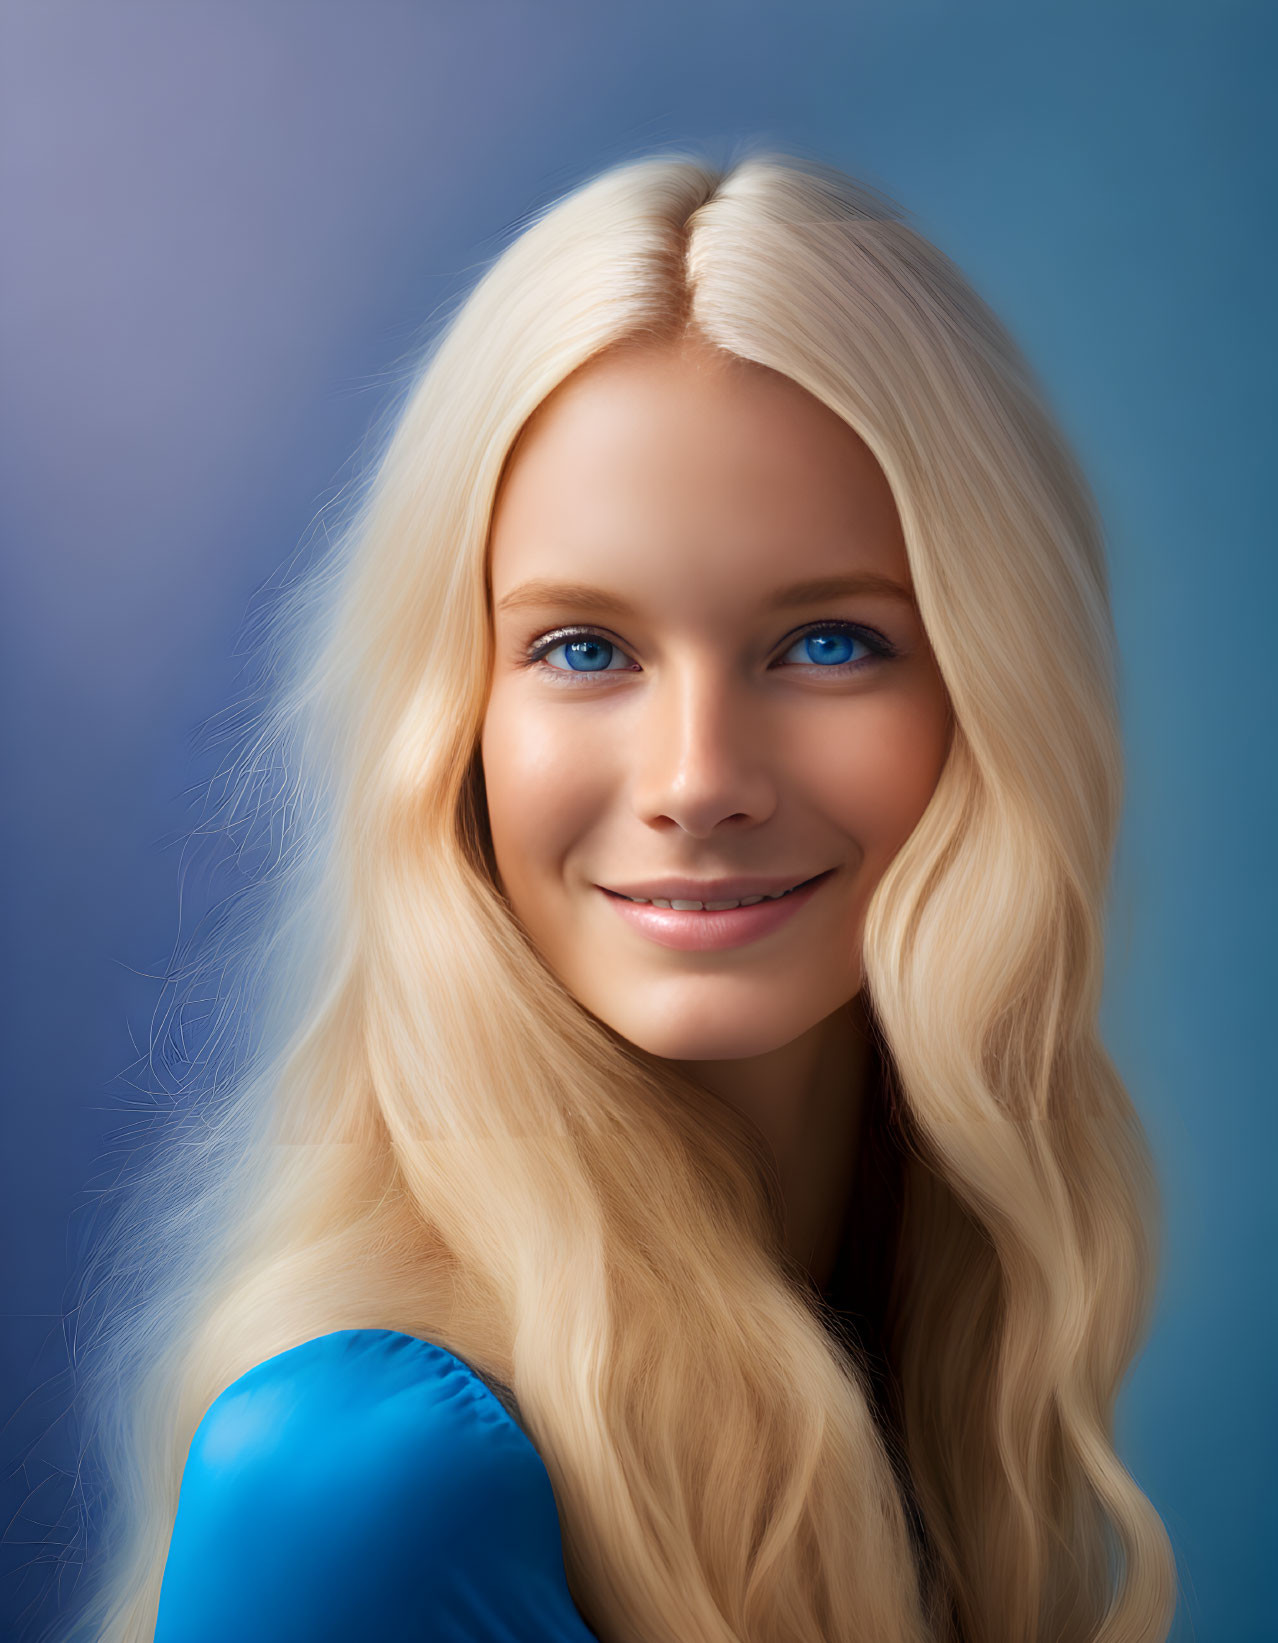 Blonde woman with blue eyes and top on blue background